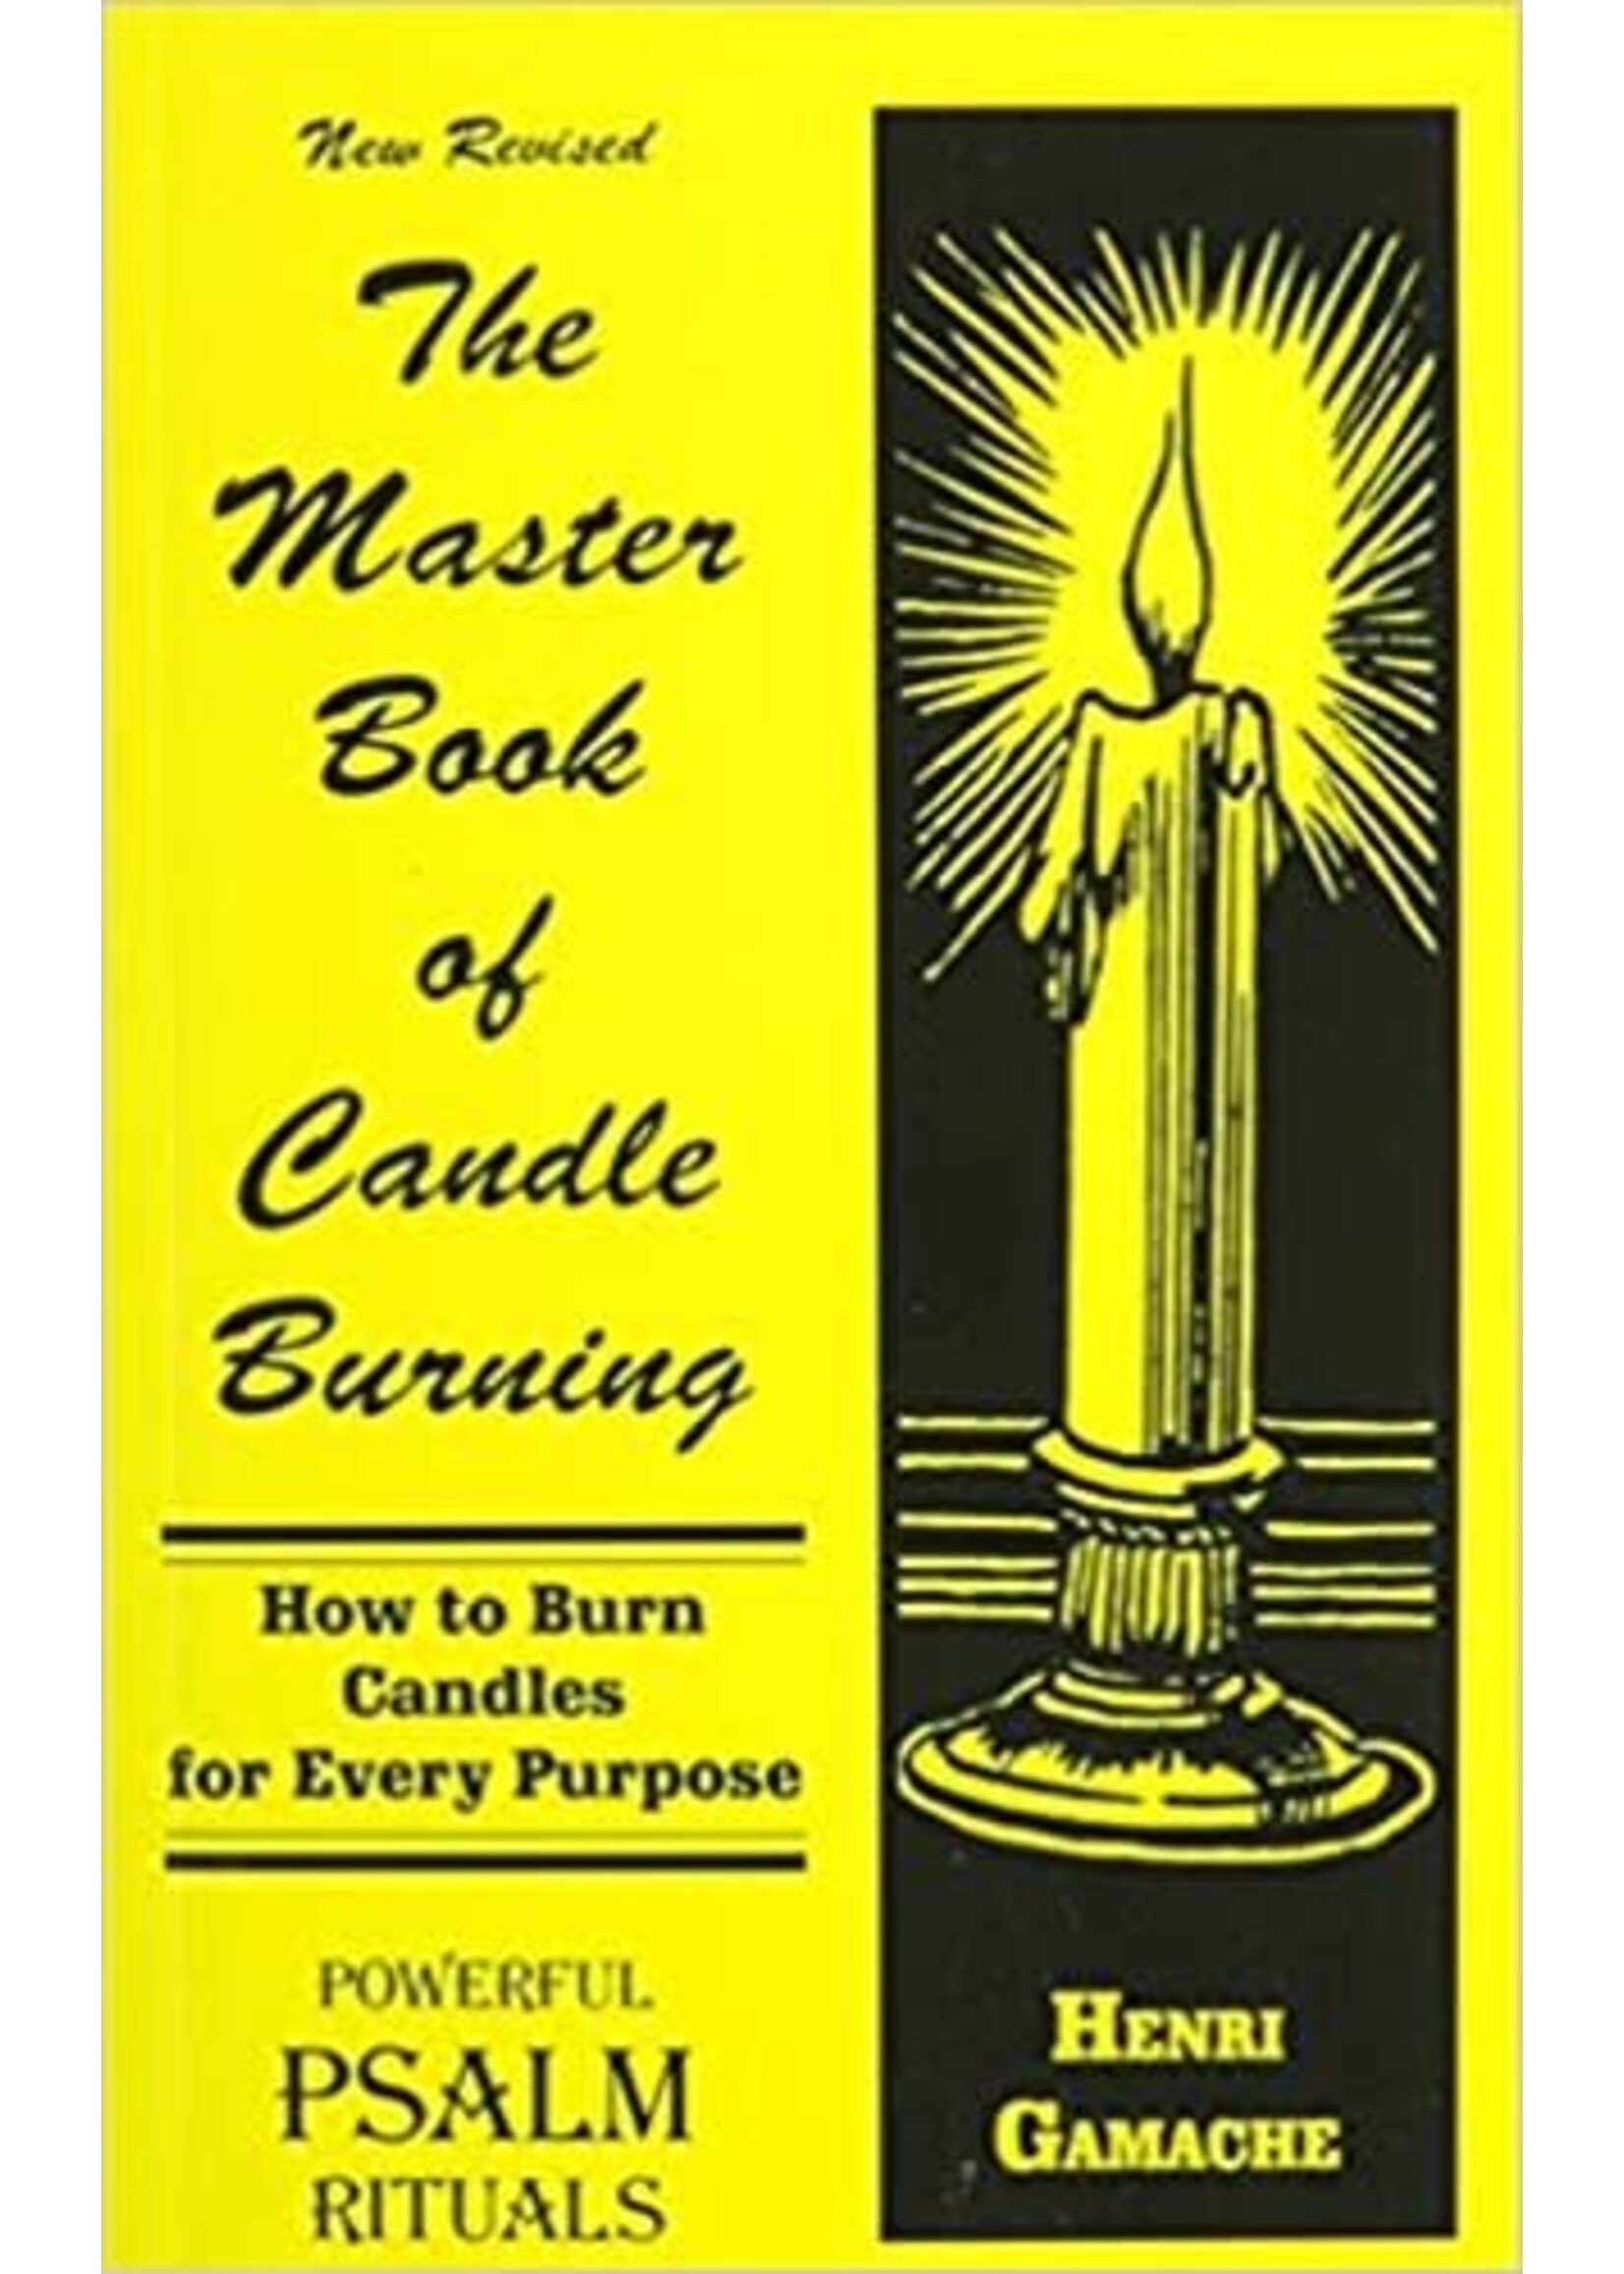 The Master Book of Candleburning by Henri Gamache